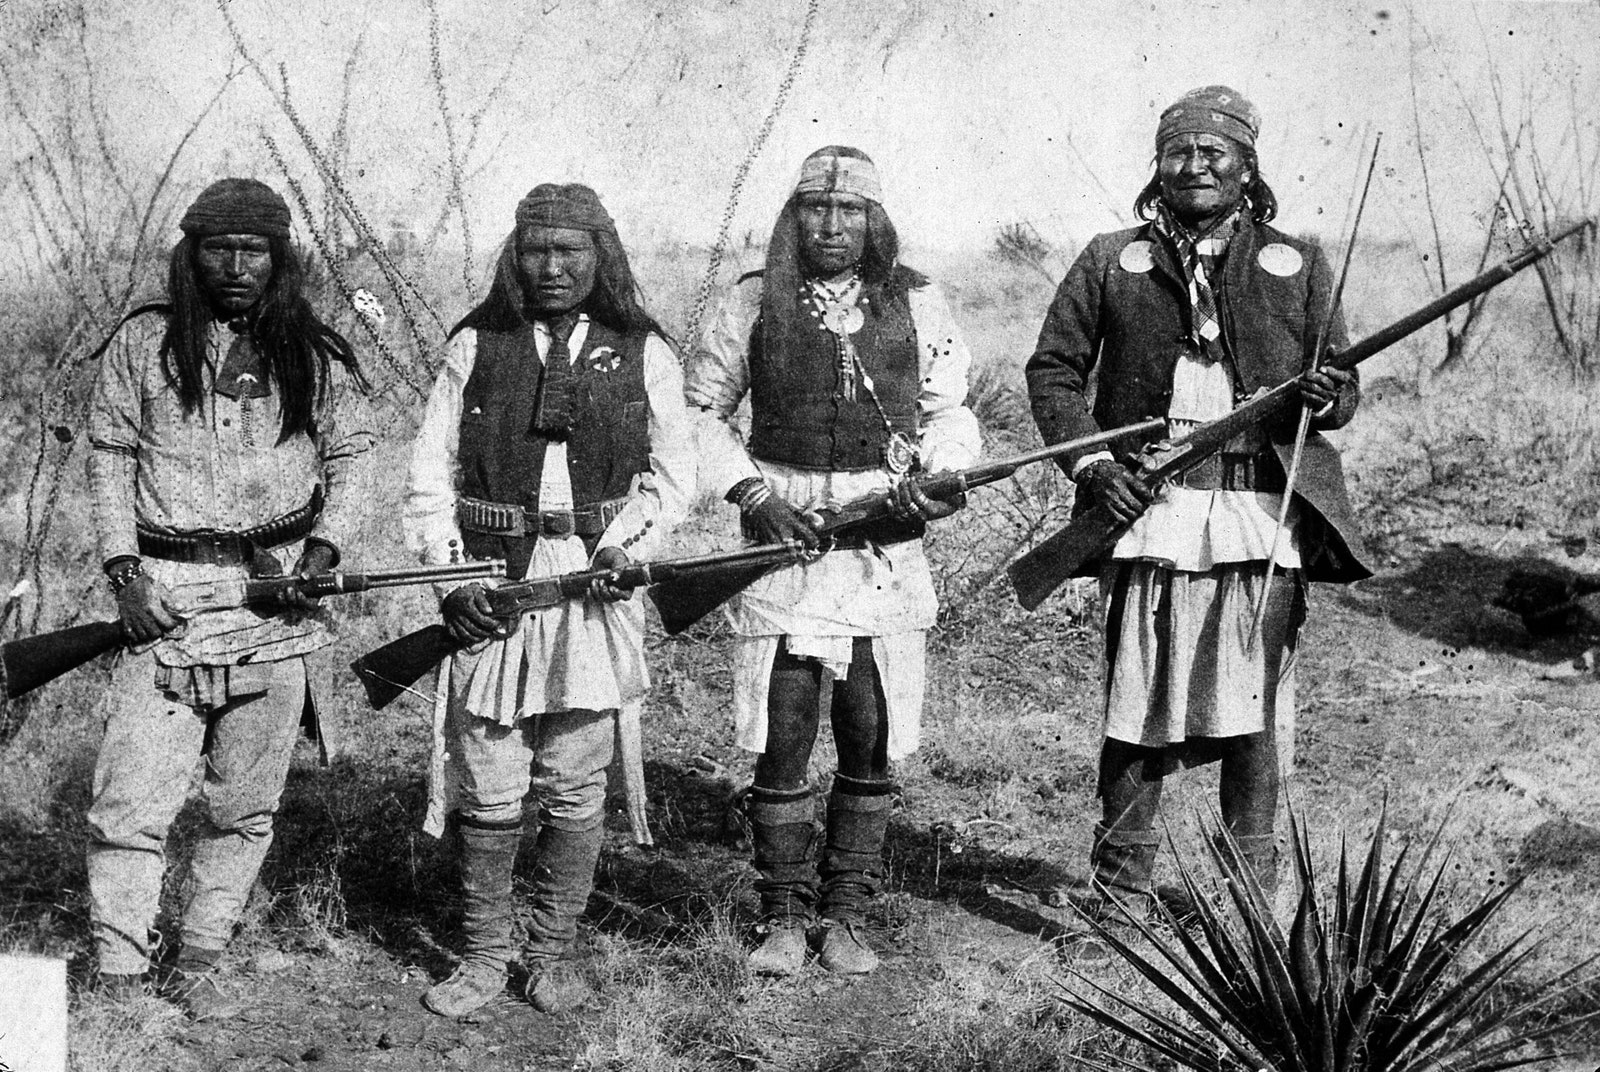 1886 Geronimo Chief of the Chiricahua Apache with some of his tribe.